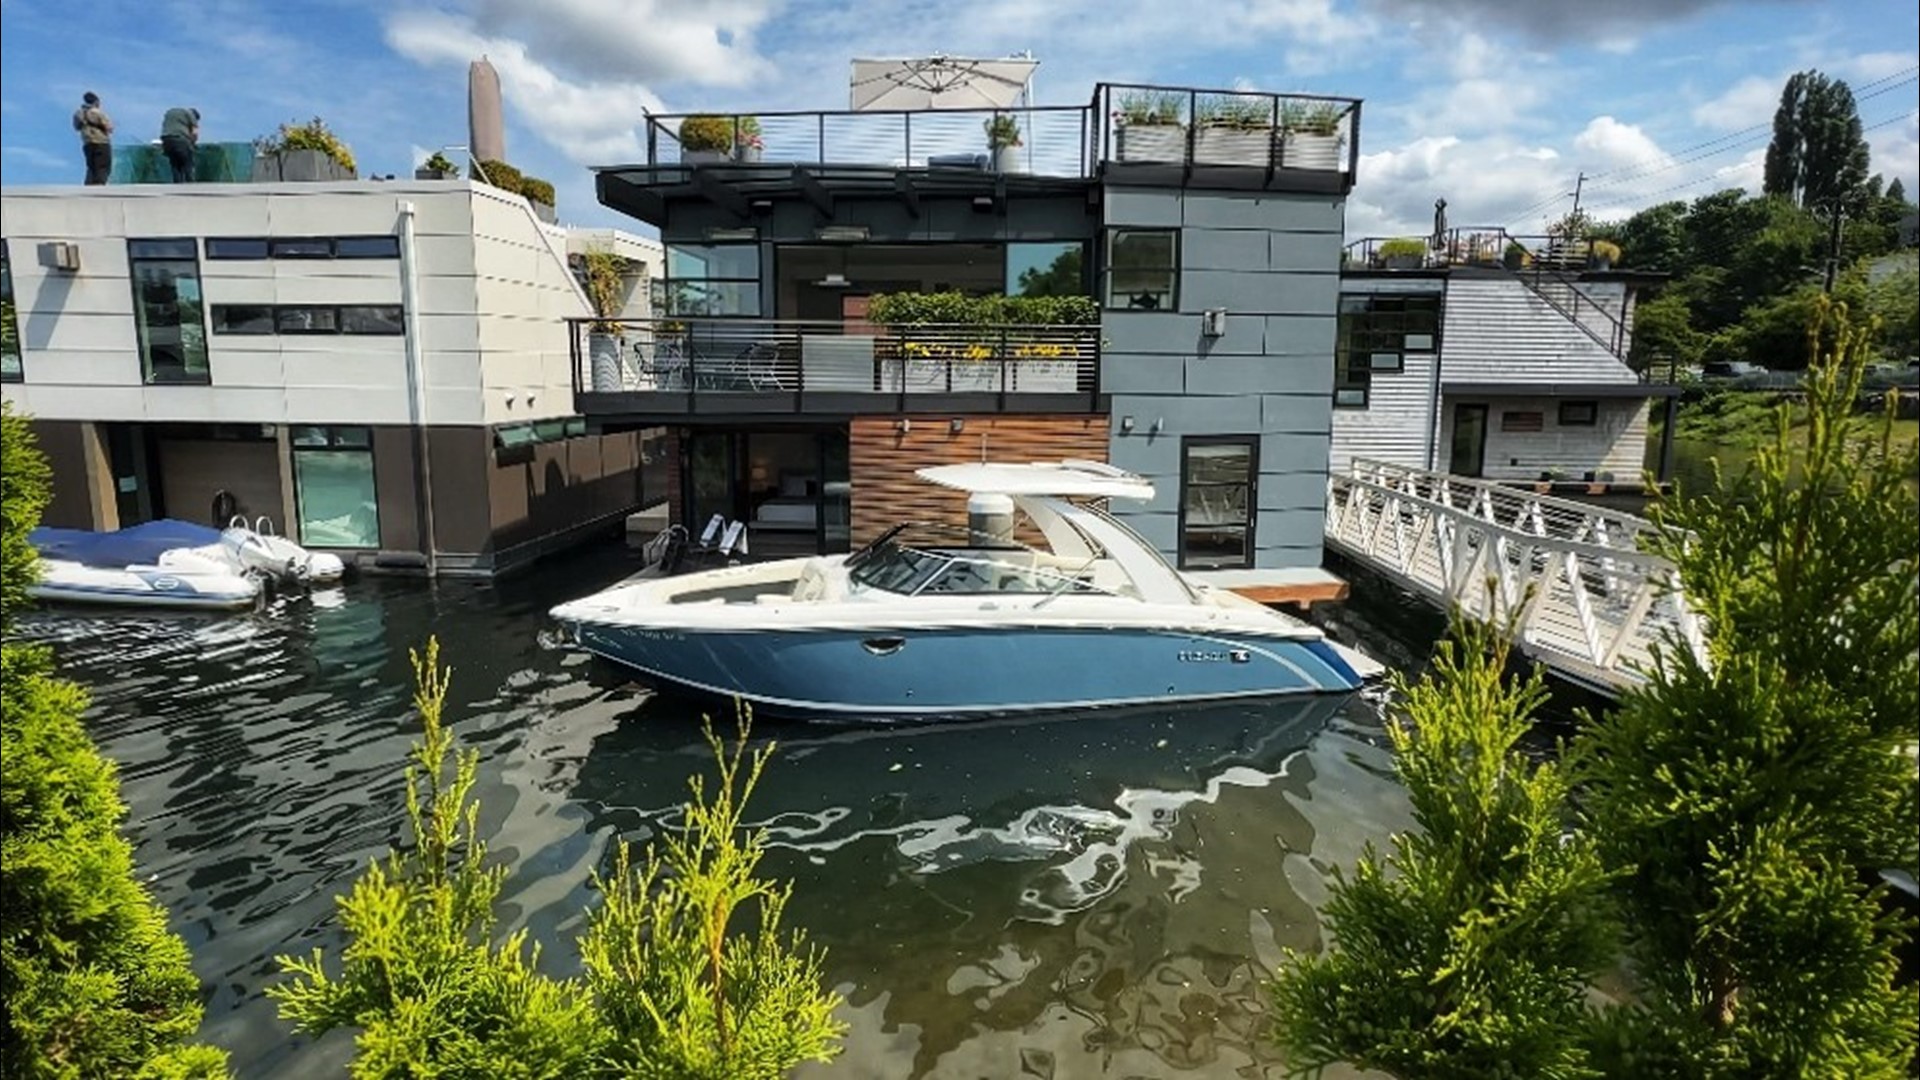 Why have a waterfront home when you can live on the water? Sponsored by Washington Lottery and Hit 5.